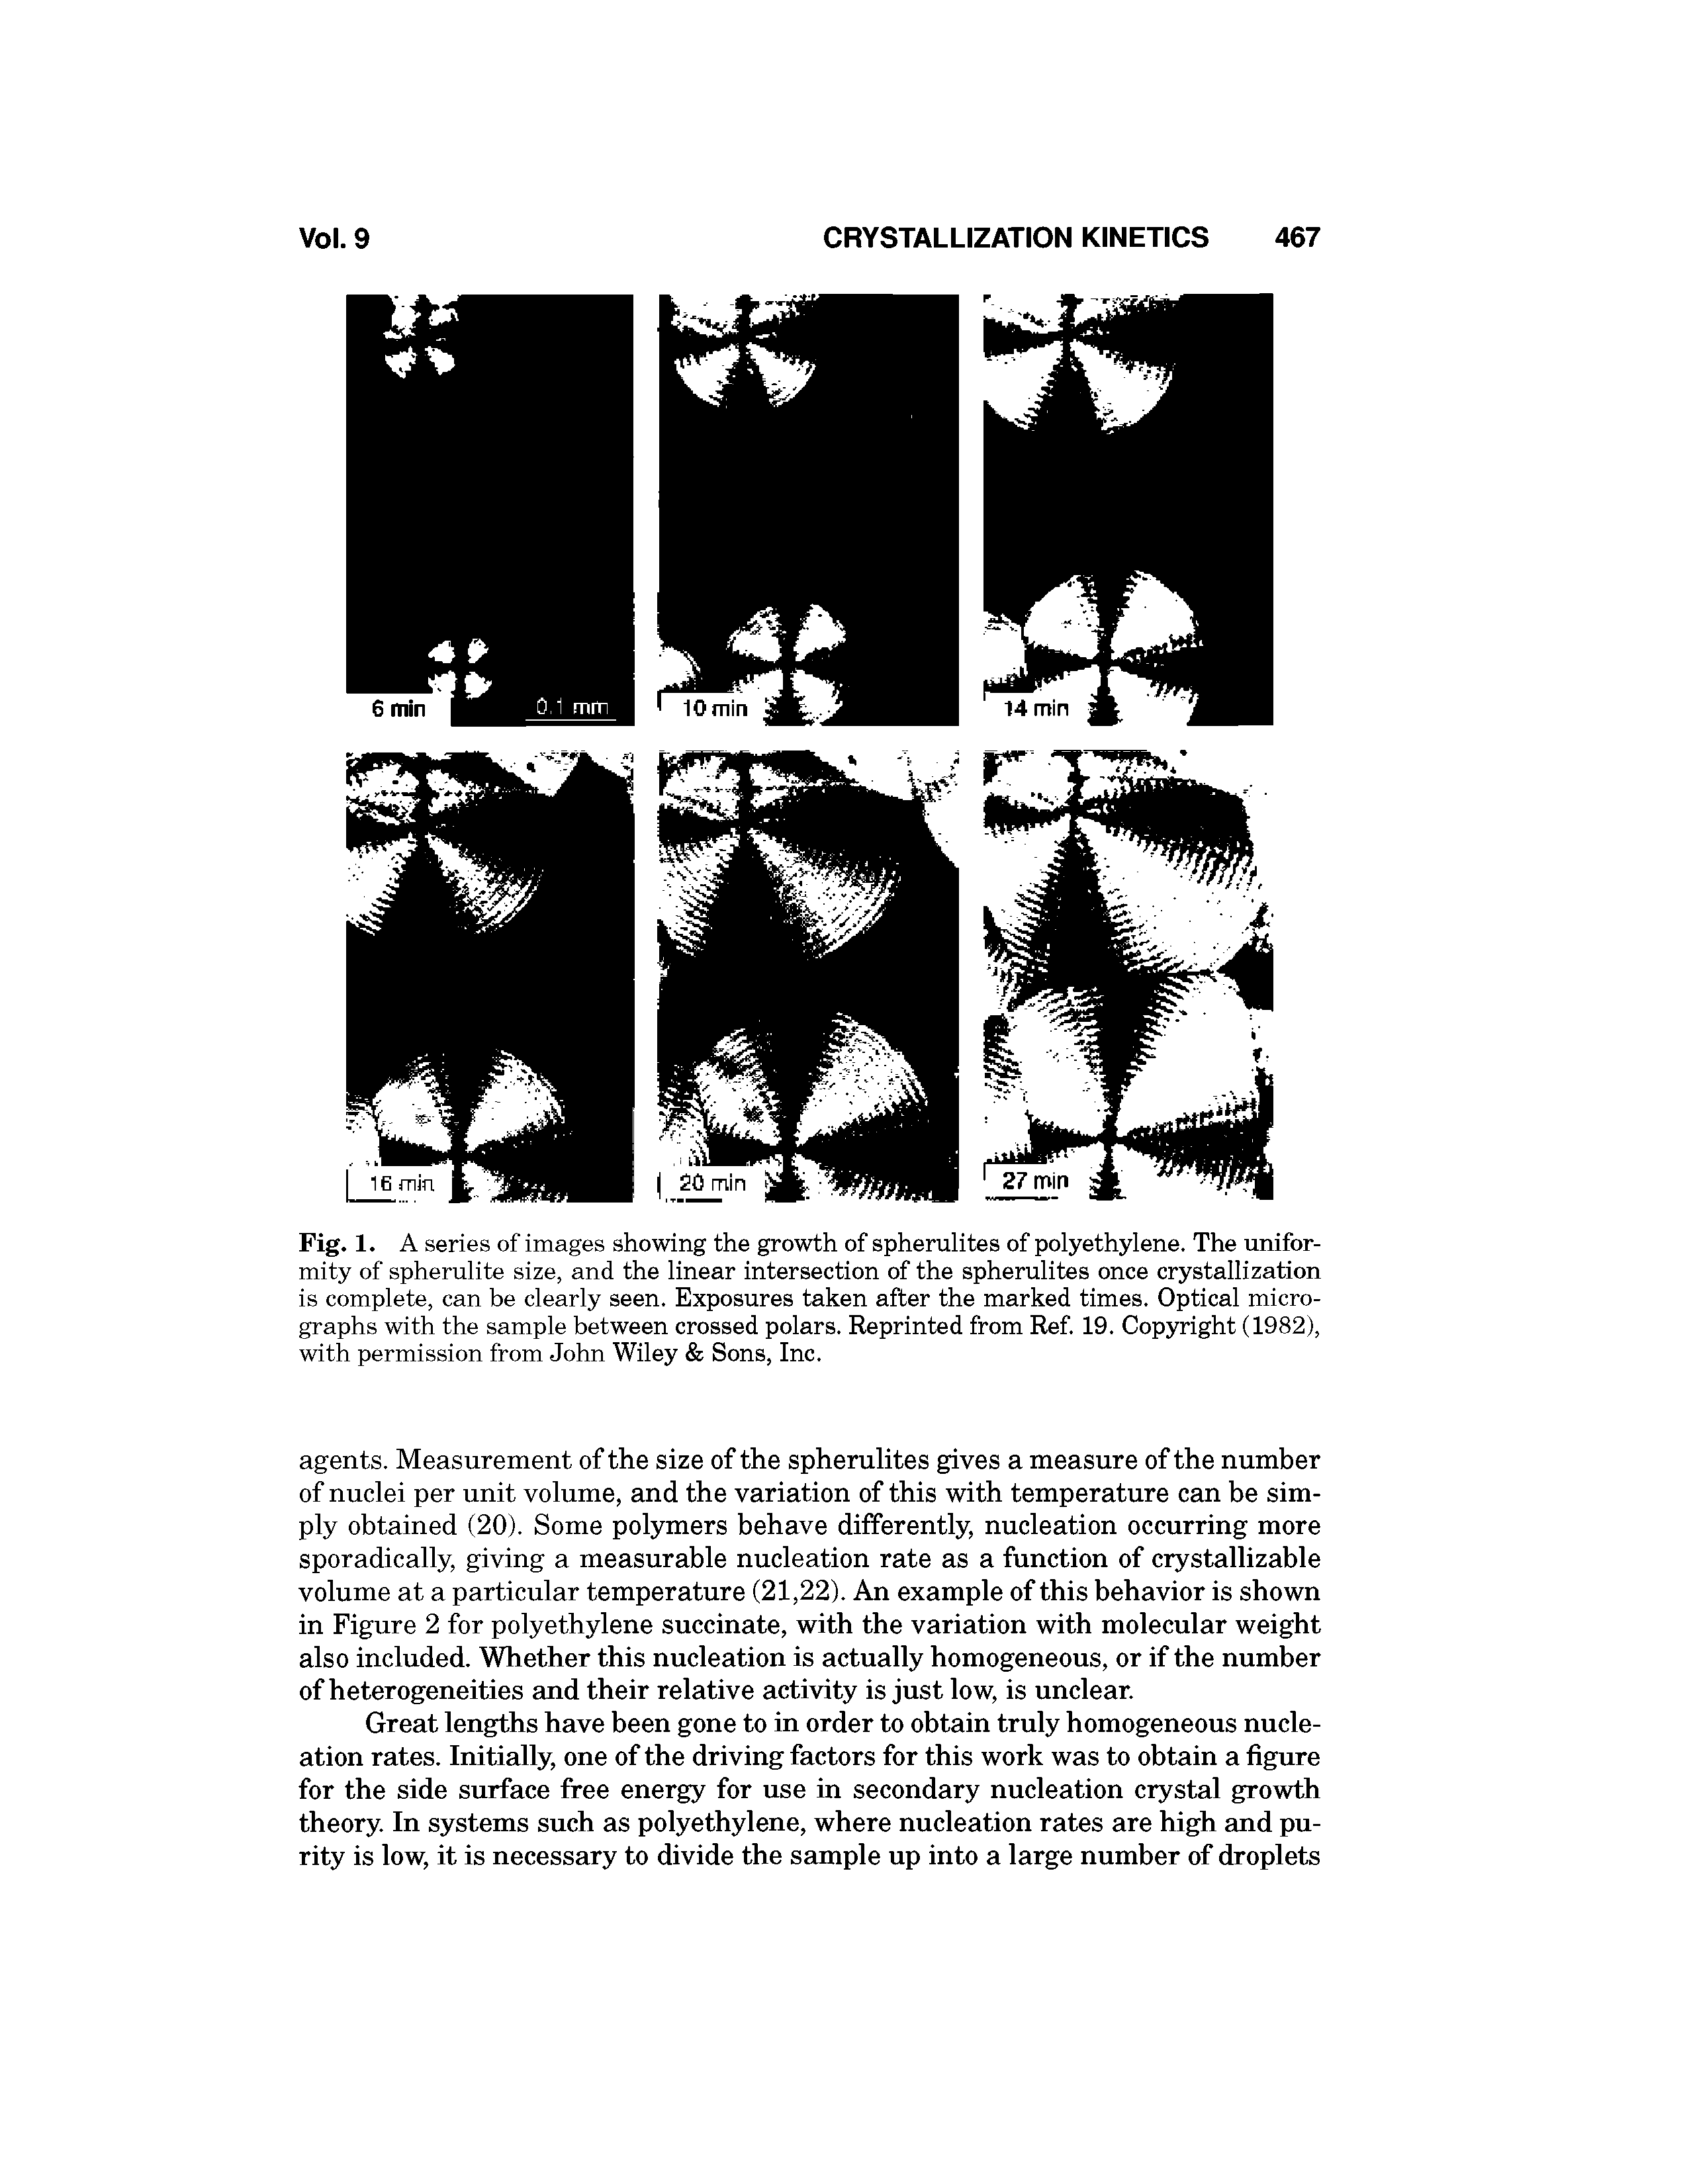 Fig. 1. A series of images showing the growth of spherulites of polyethylene. The uniformity of spherulite size, and the linear intersection of the spherulites once crystallization is complete, can be clearly seen. Exposures taken after the marked times. Optical micrographs with the sample between crossed polars. Reprinted from Ref 19. Copyright (1982), with permission from John Wiley Sons, Inc.